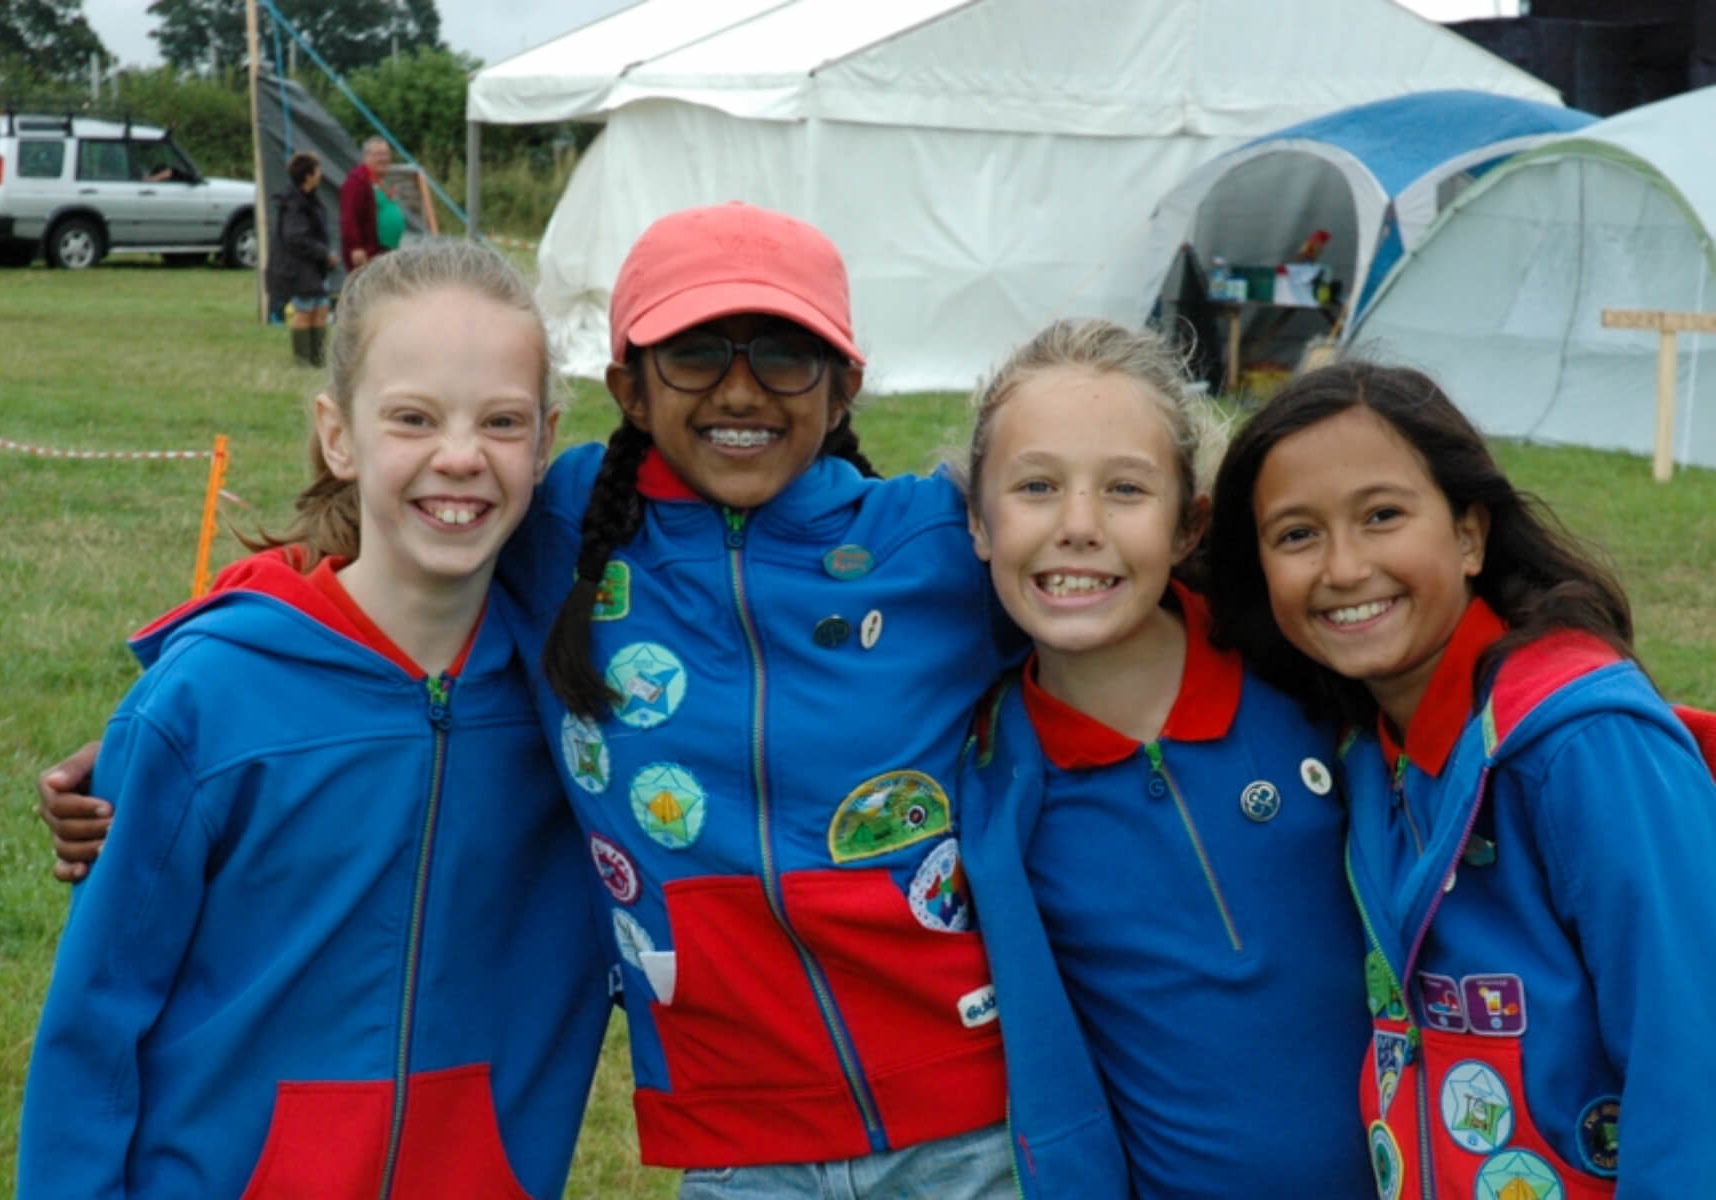 4 Guides in uniform smiling during camp